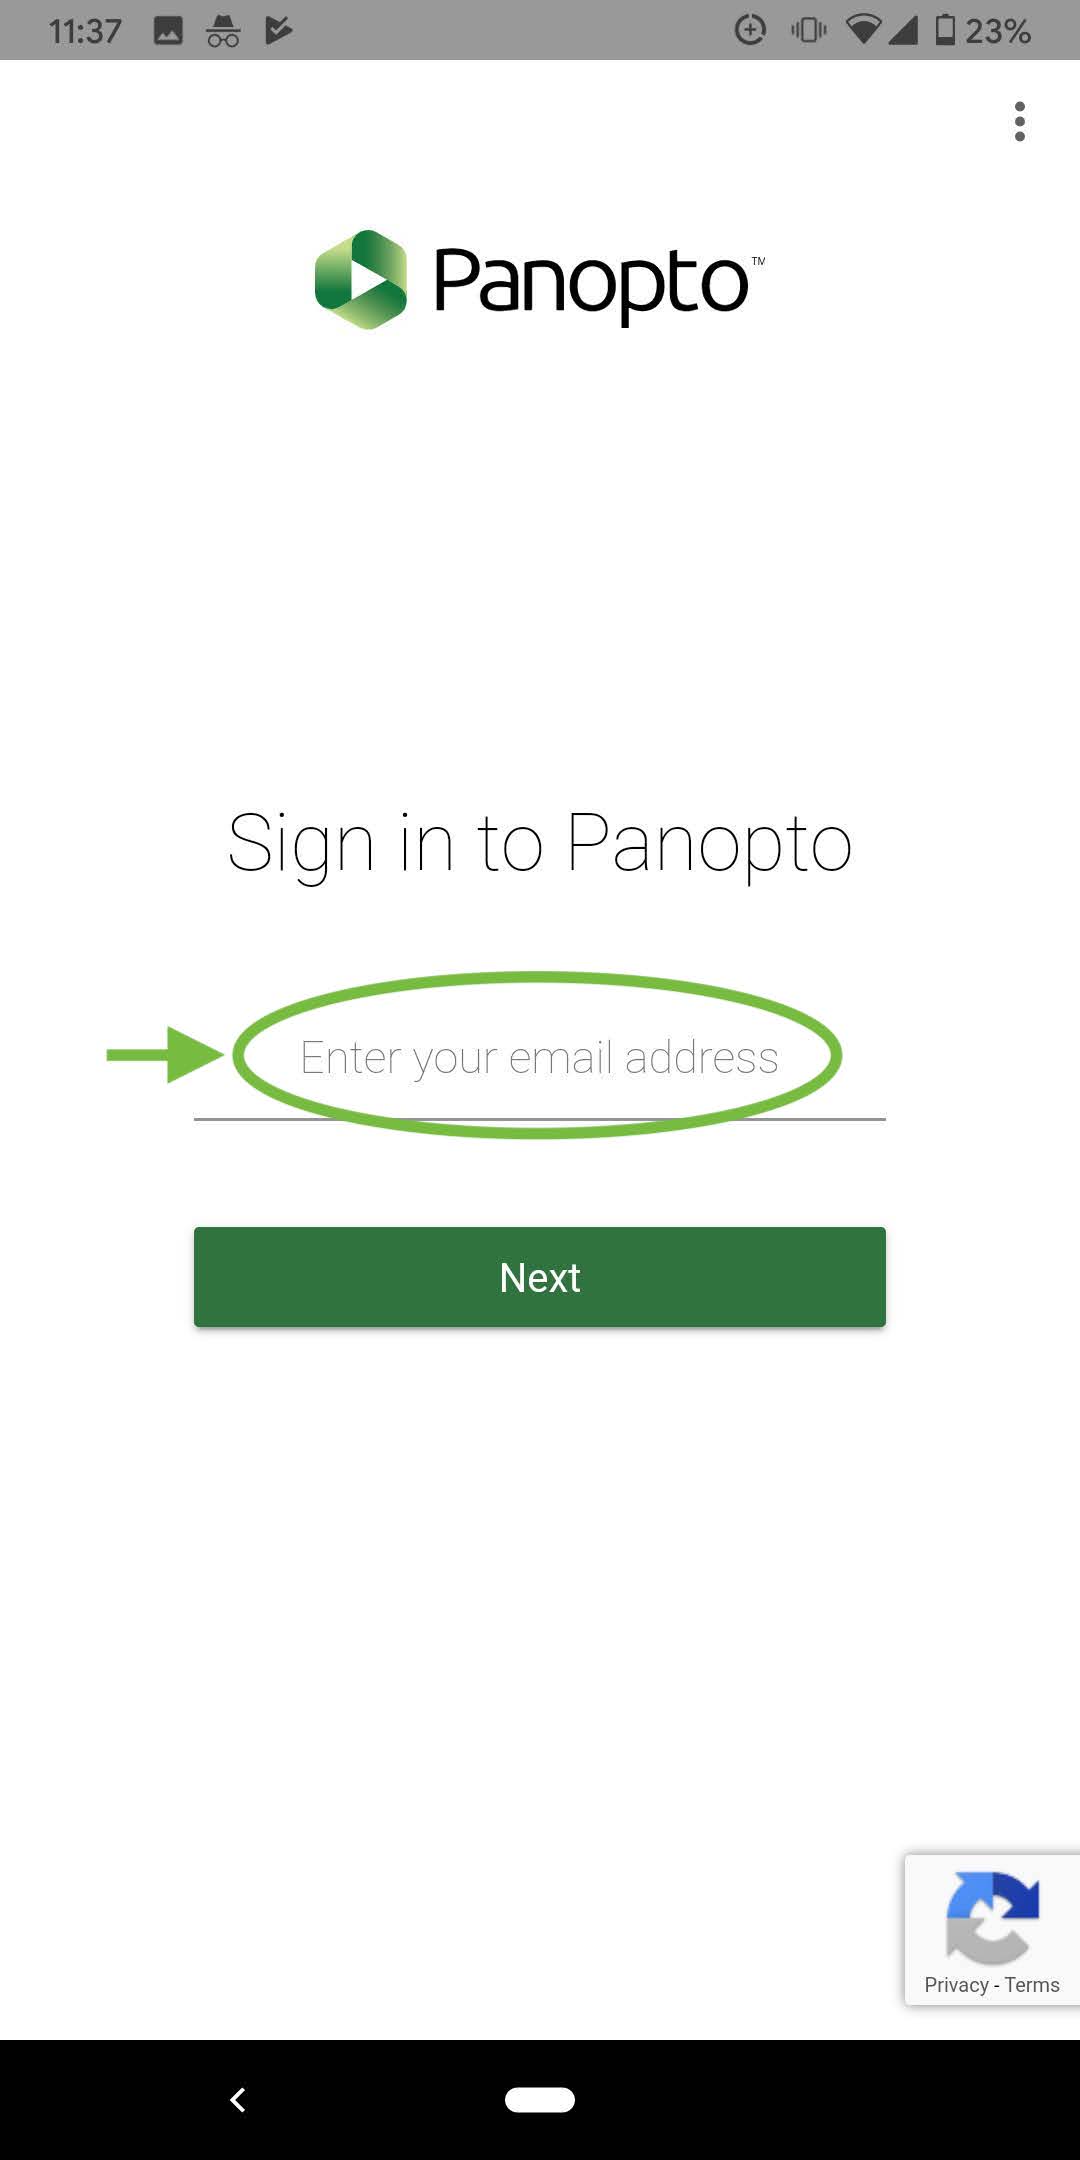 The sign-in screen for the Panopto beta app. There is a text field to enter your email address in the center of the screen (indicated), and a next button.